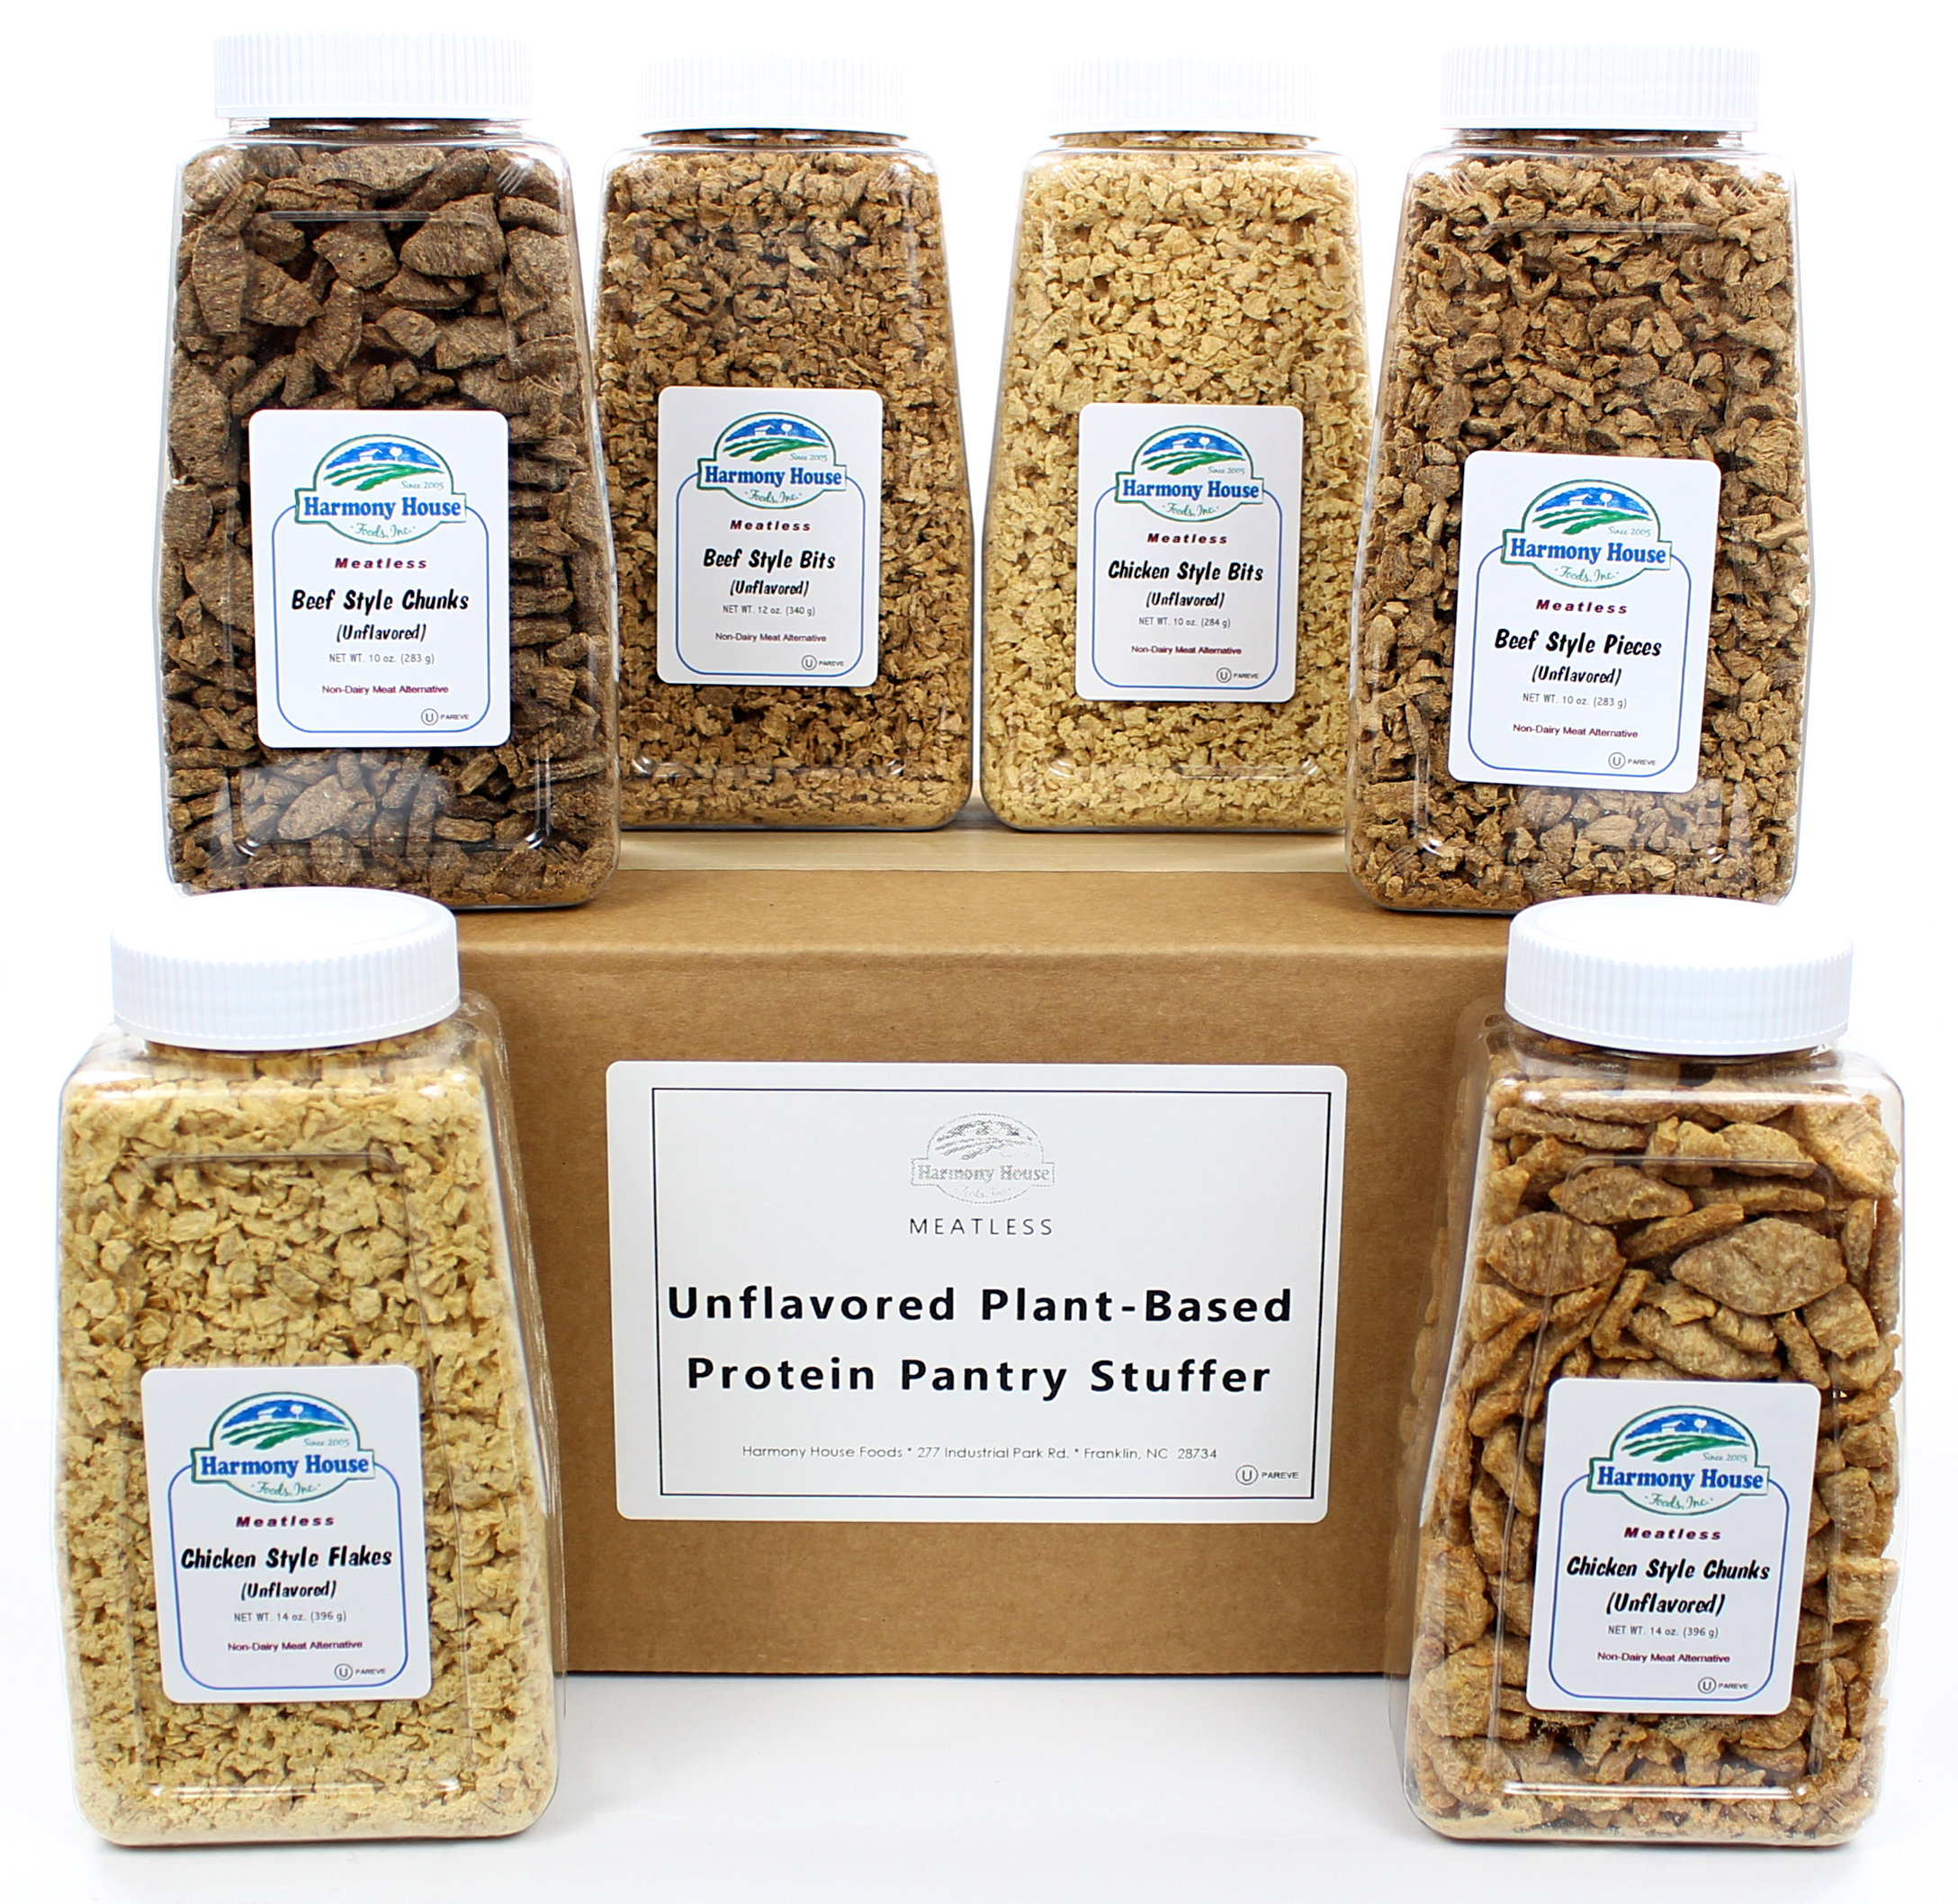 Six jars of unsweetened granola, granola bars, (Quart Size) Harmony House Unflavored Plant-Based Protein Pantry Stuffer.